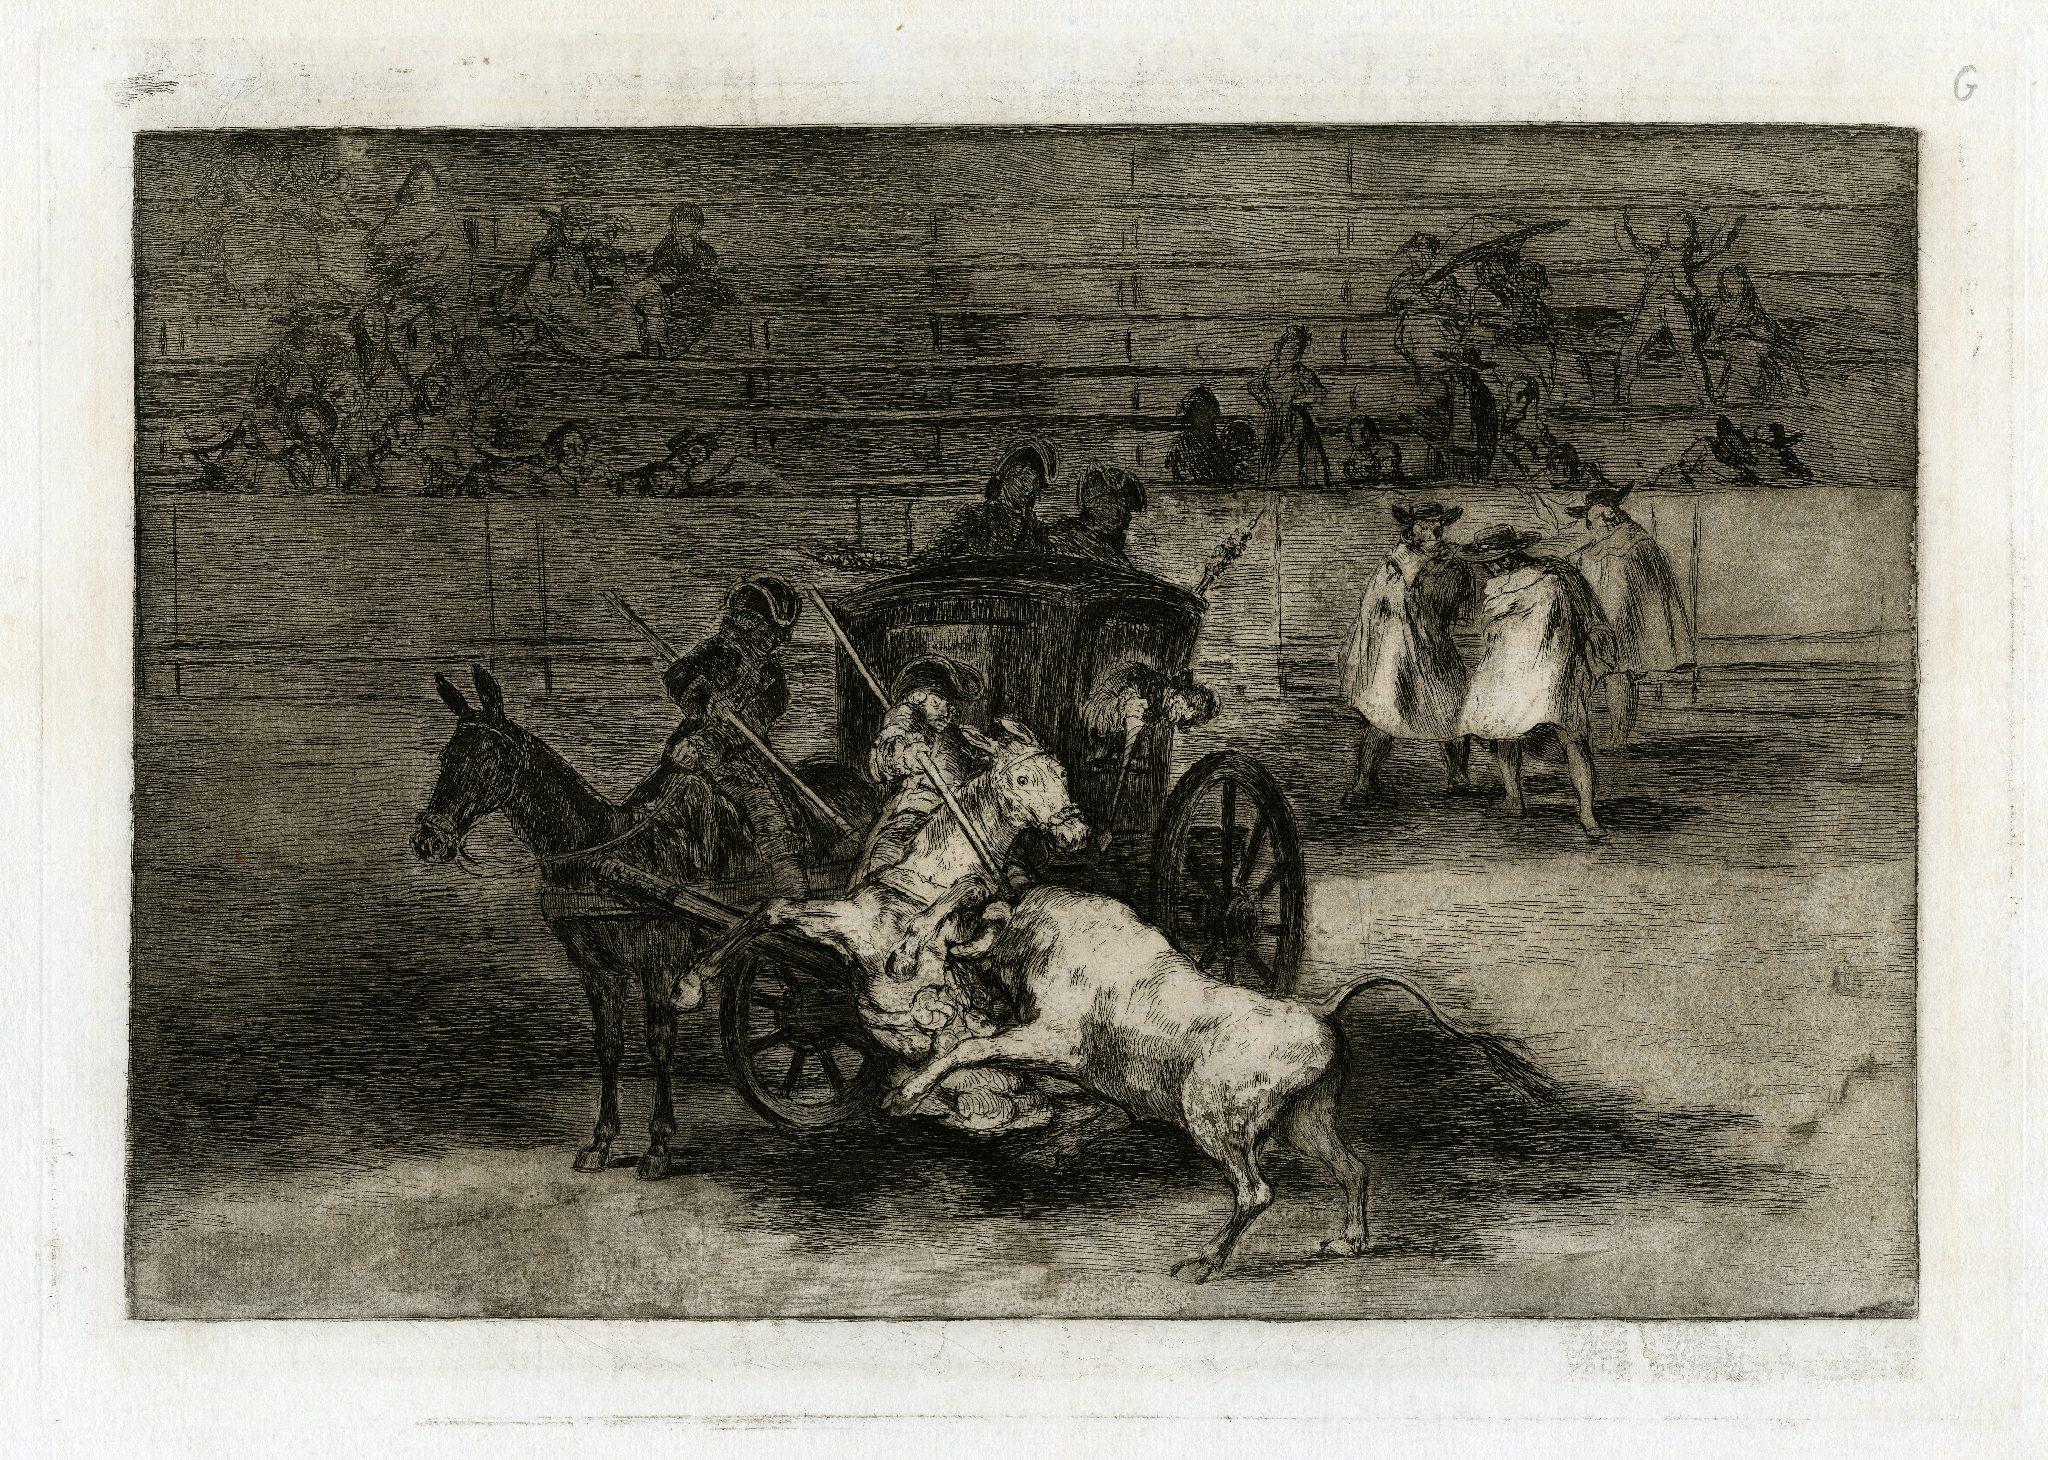 Combat Dans une Voiture Attelee de Deux Mulets (Fight in a carriage harnessed) - Print by Francisco Goya